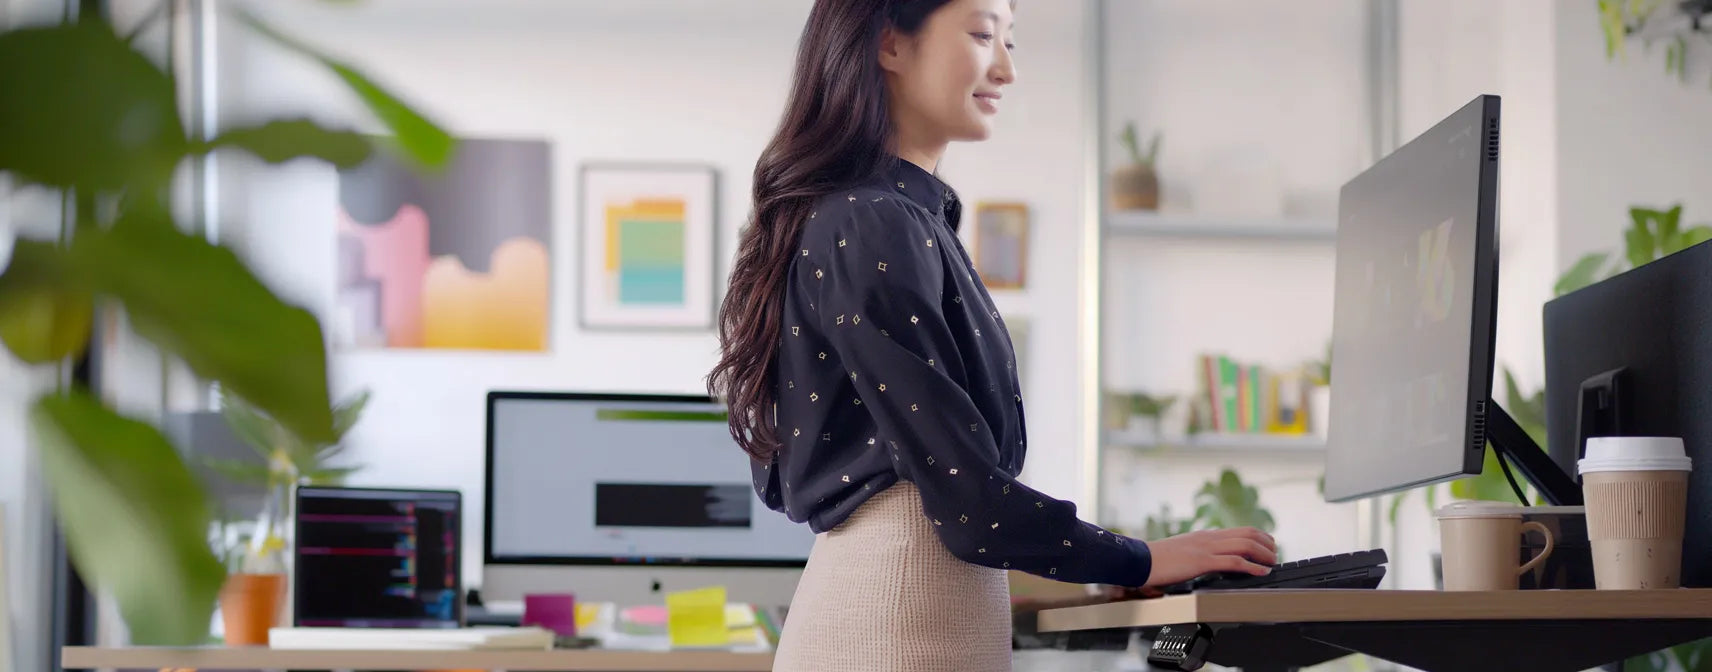 Professional woman using a standing desk in a vibrant office environment